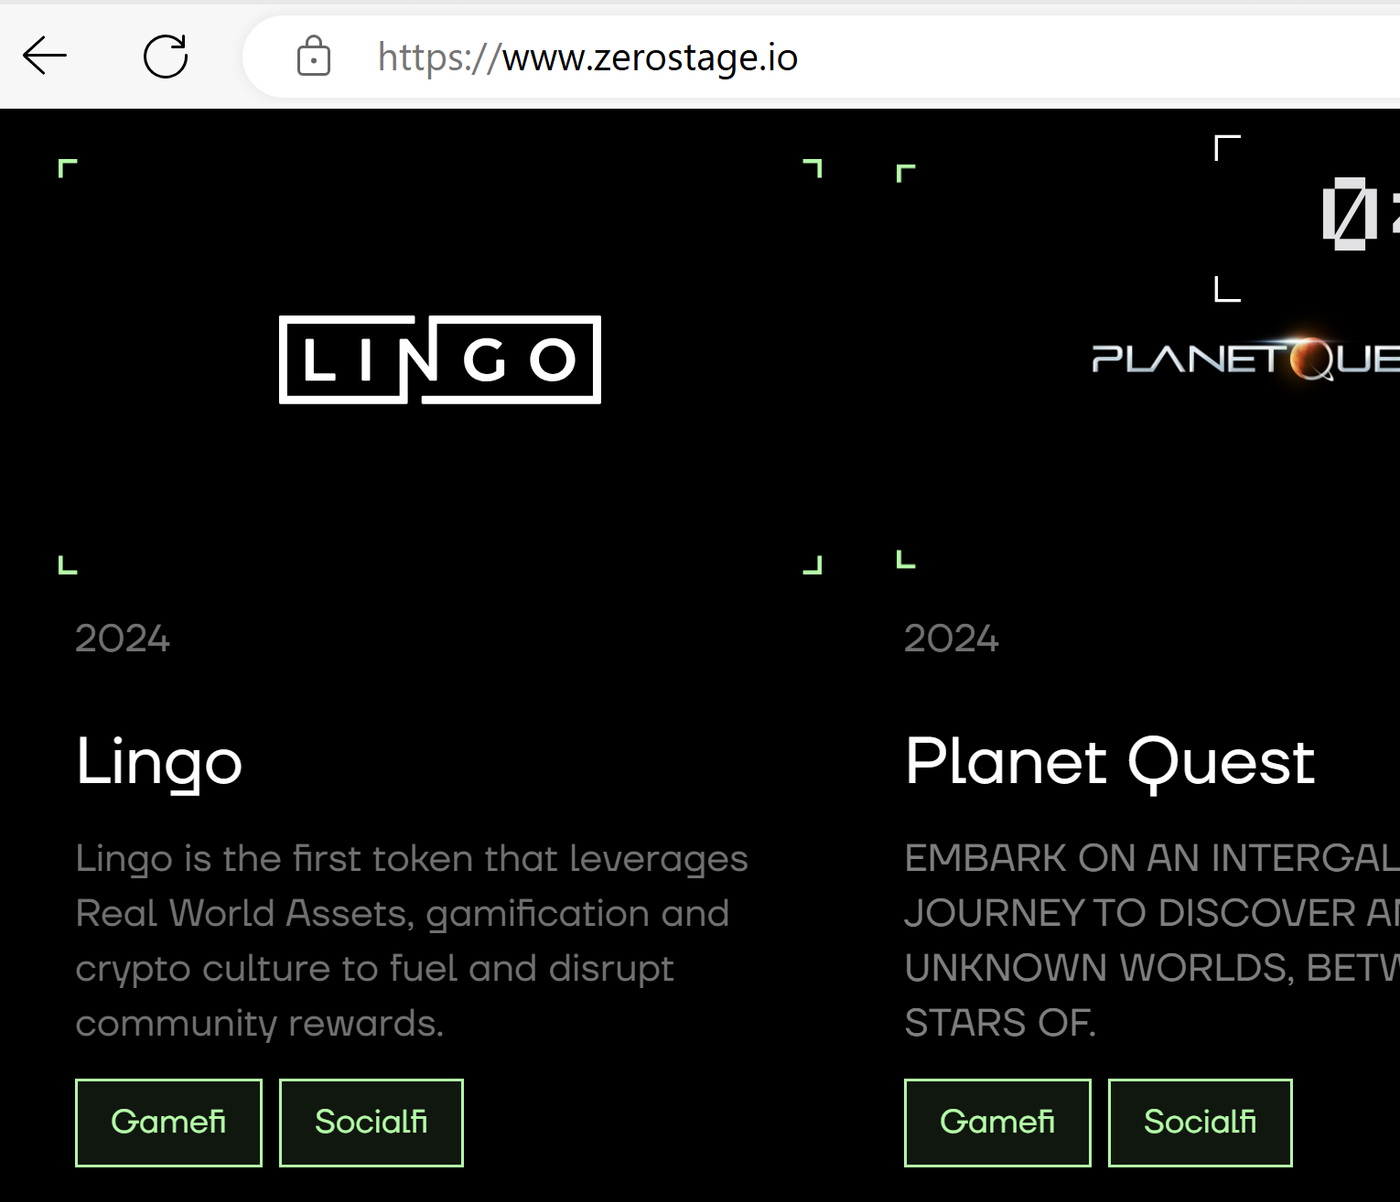 The hompage of zerostage.io, with the Lingo logo on a black background with Lingo company description